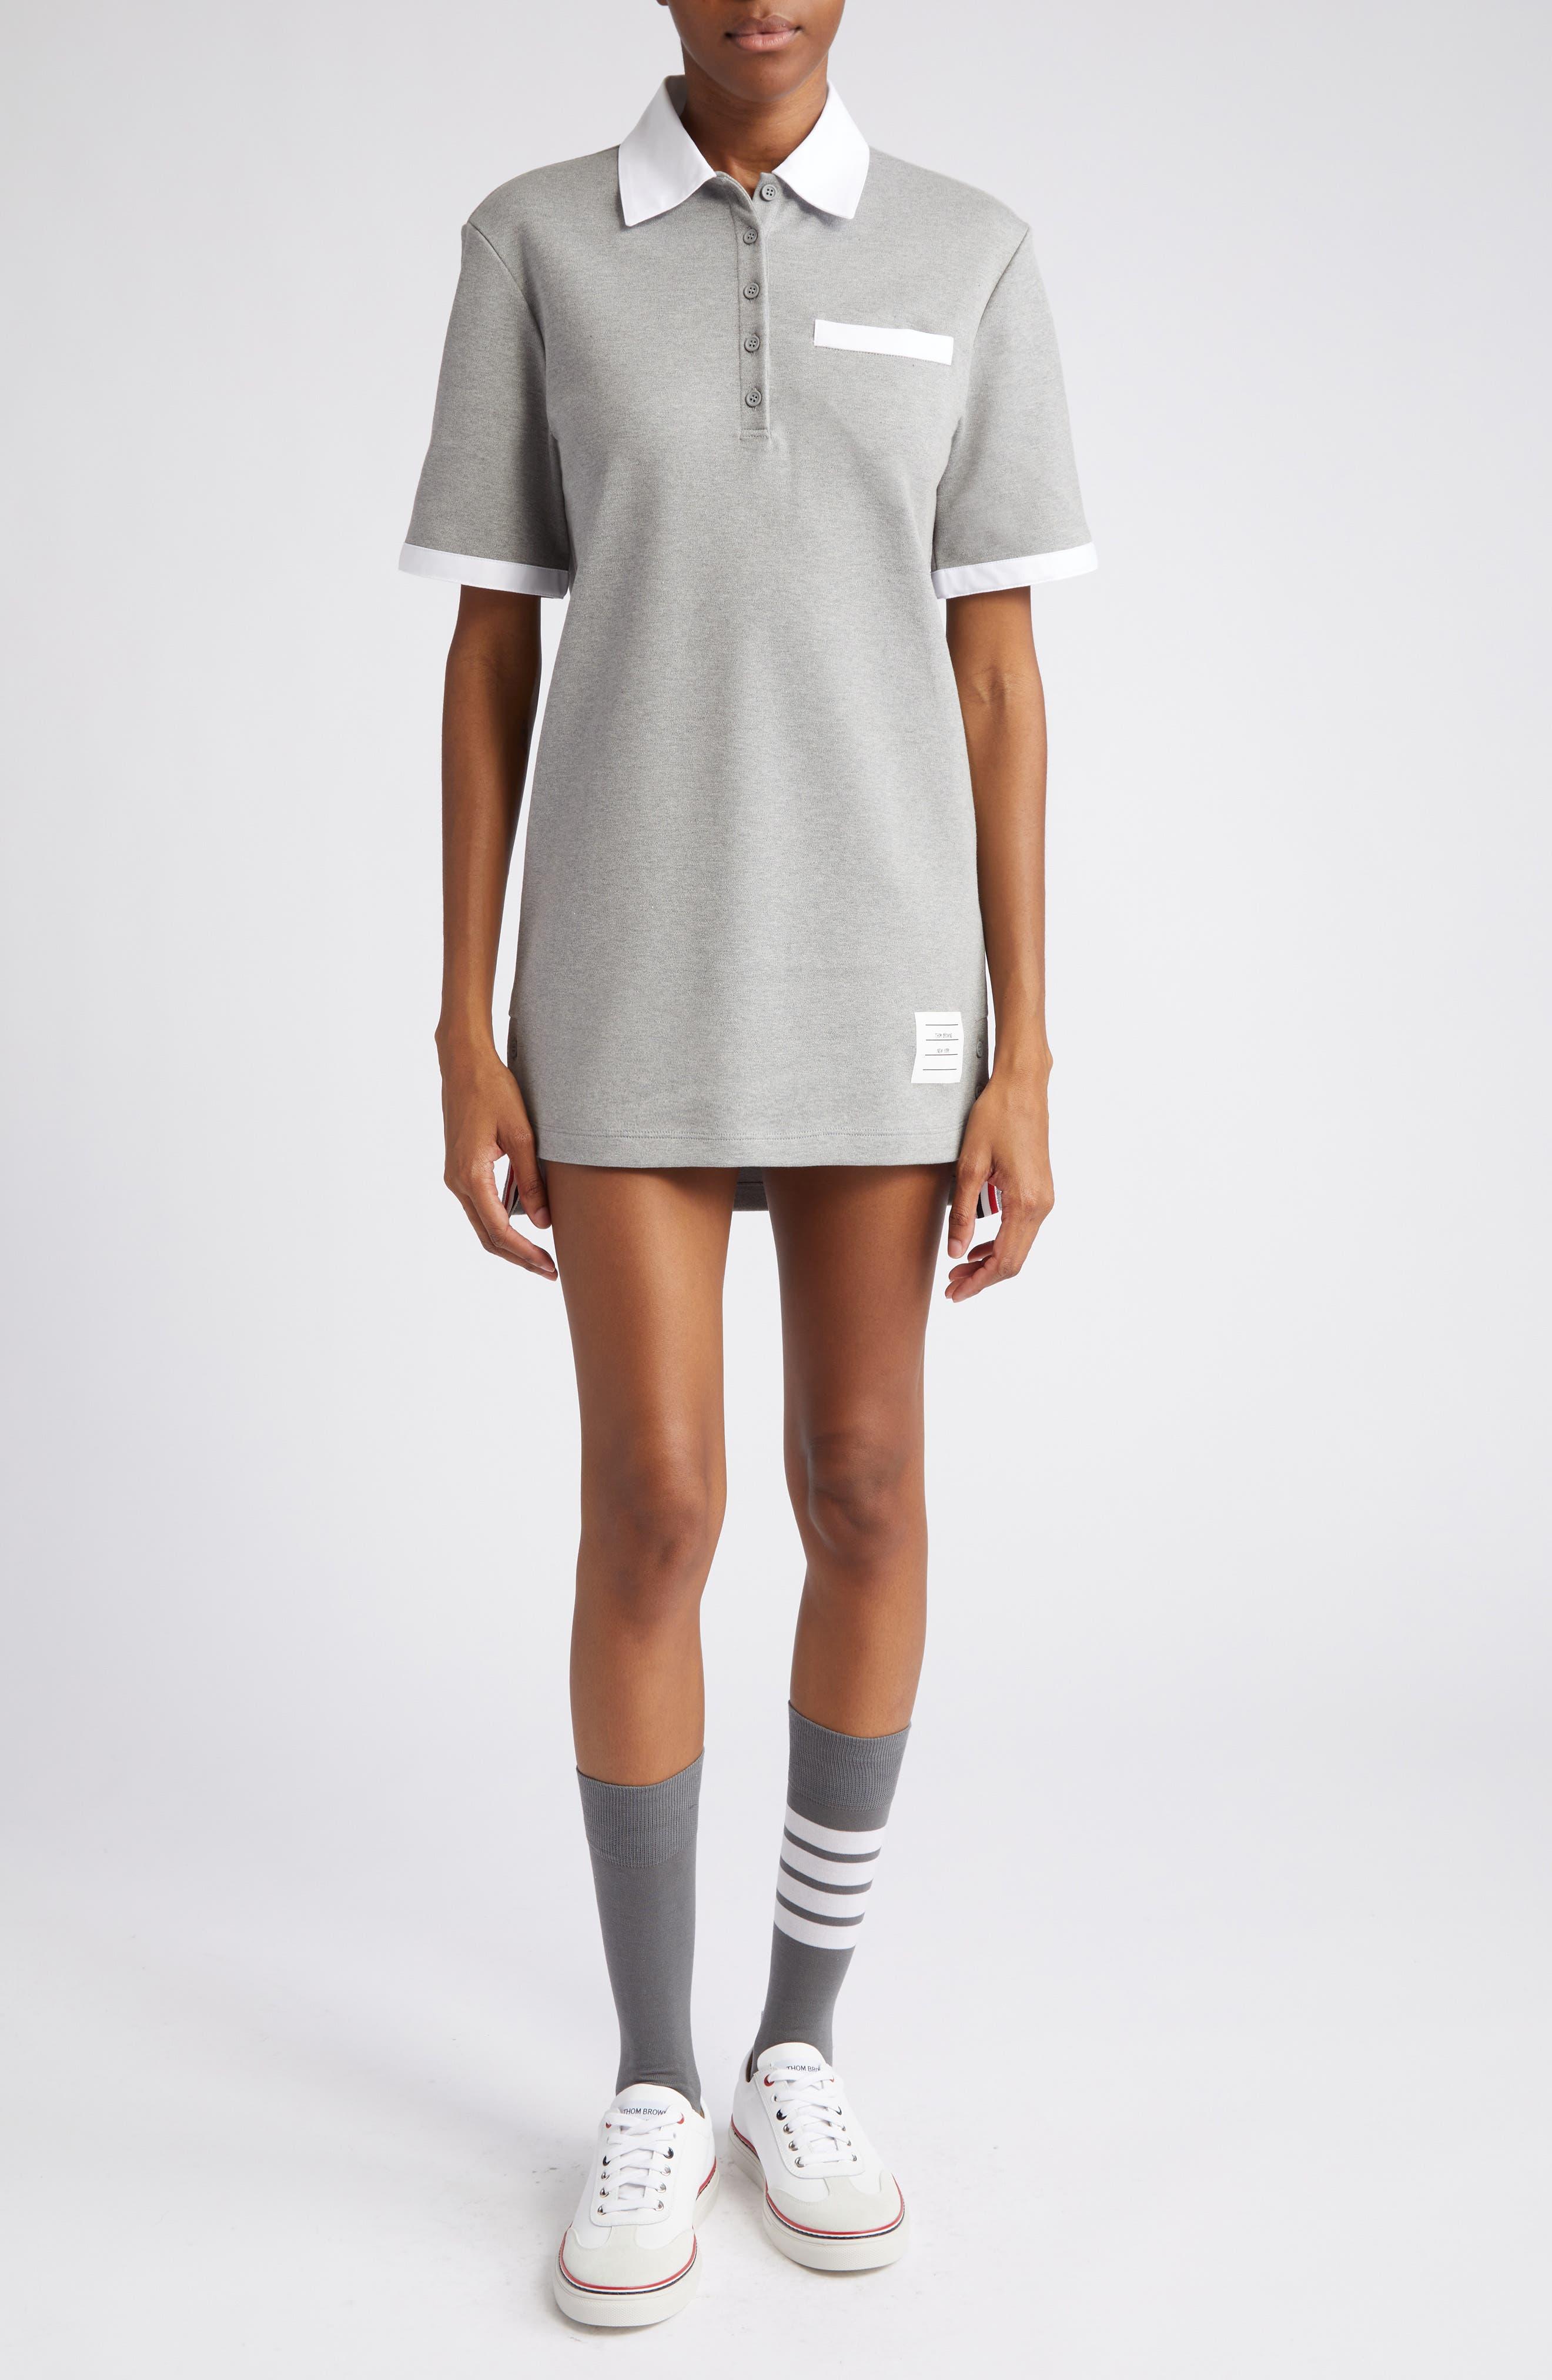 Thom Browne Short Sleeve Polo Dress in Gray | Lyst